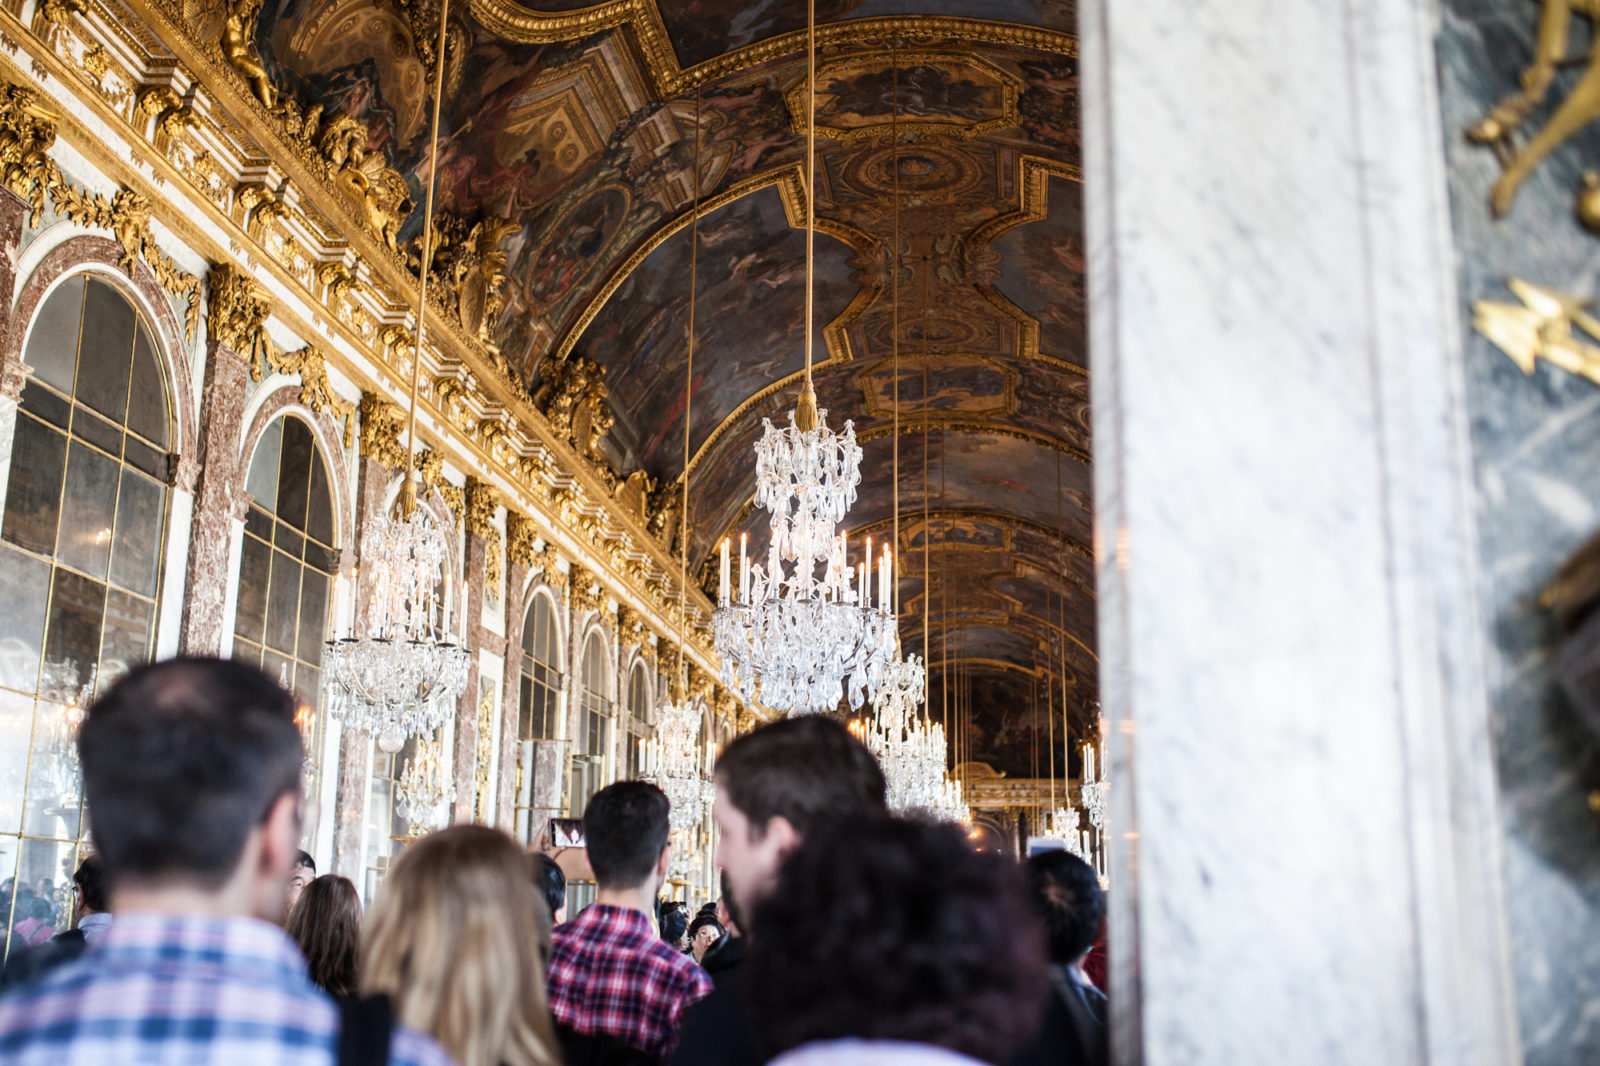 Hall of Mirrors in Palace of Versailles Paris France